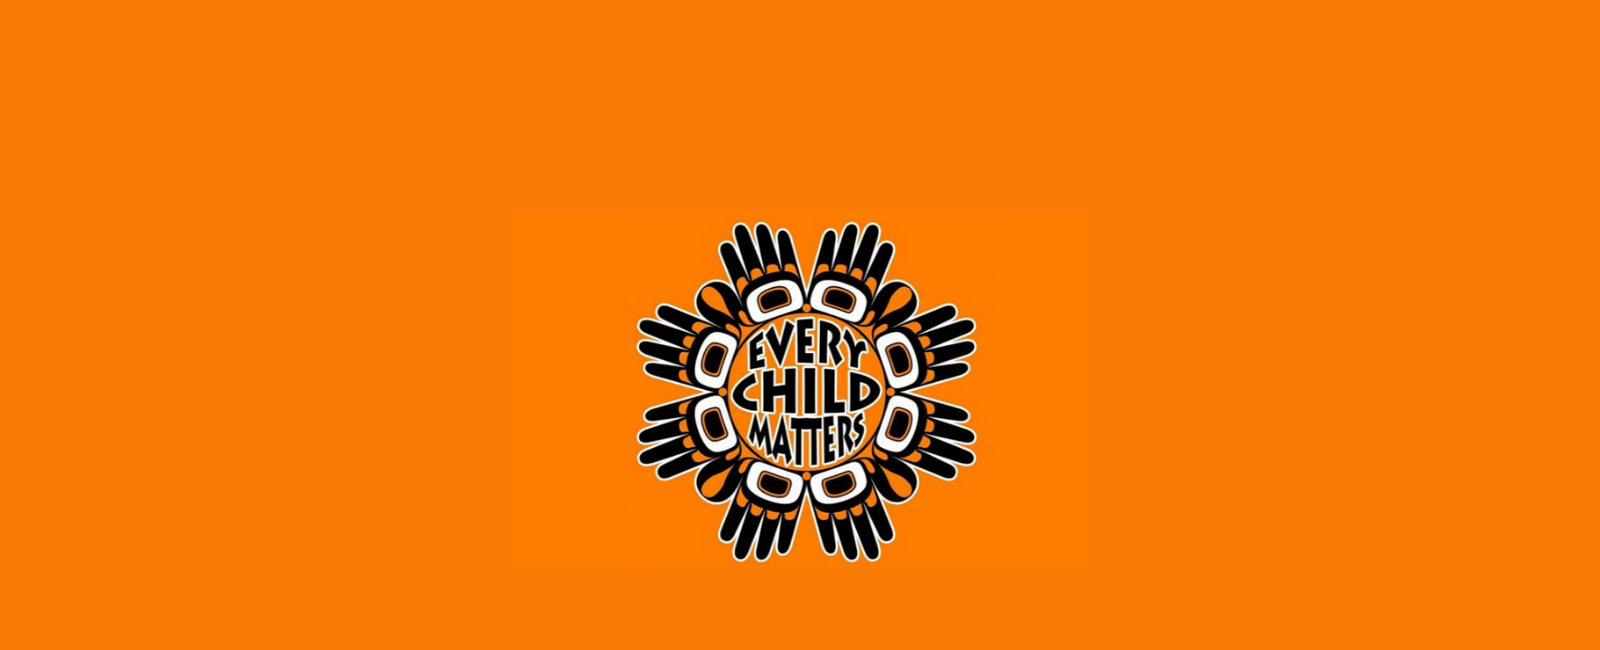 Orange background with image "Every Child Matters"